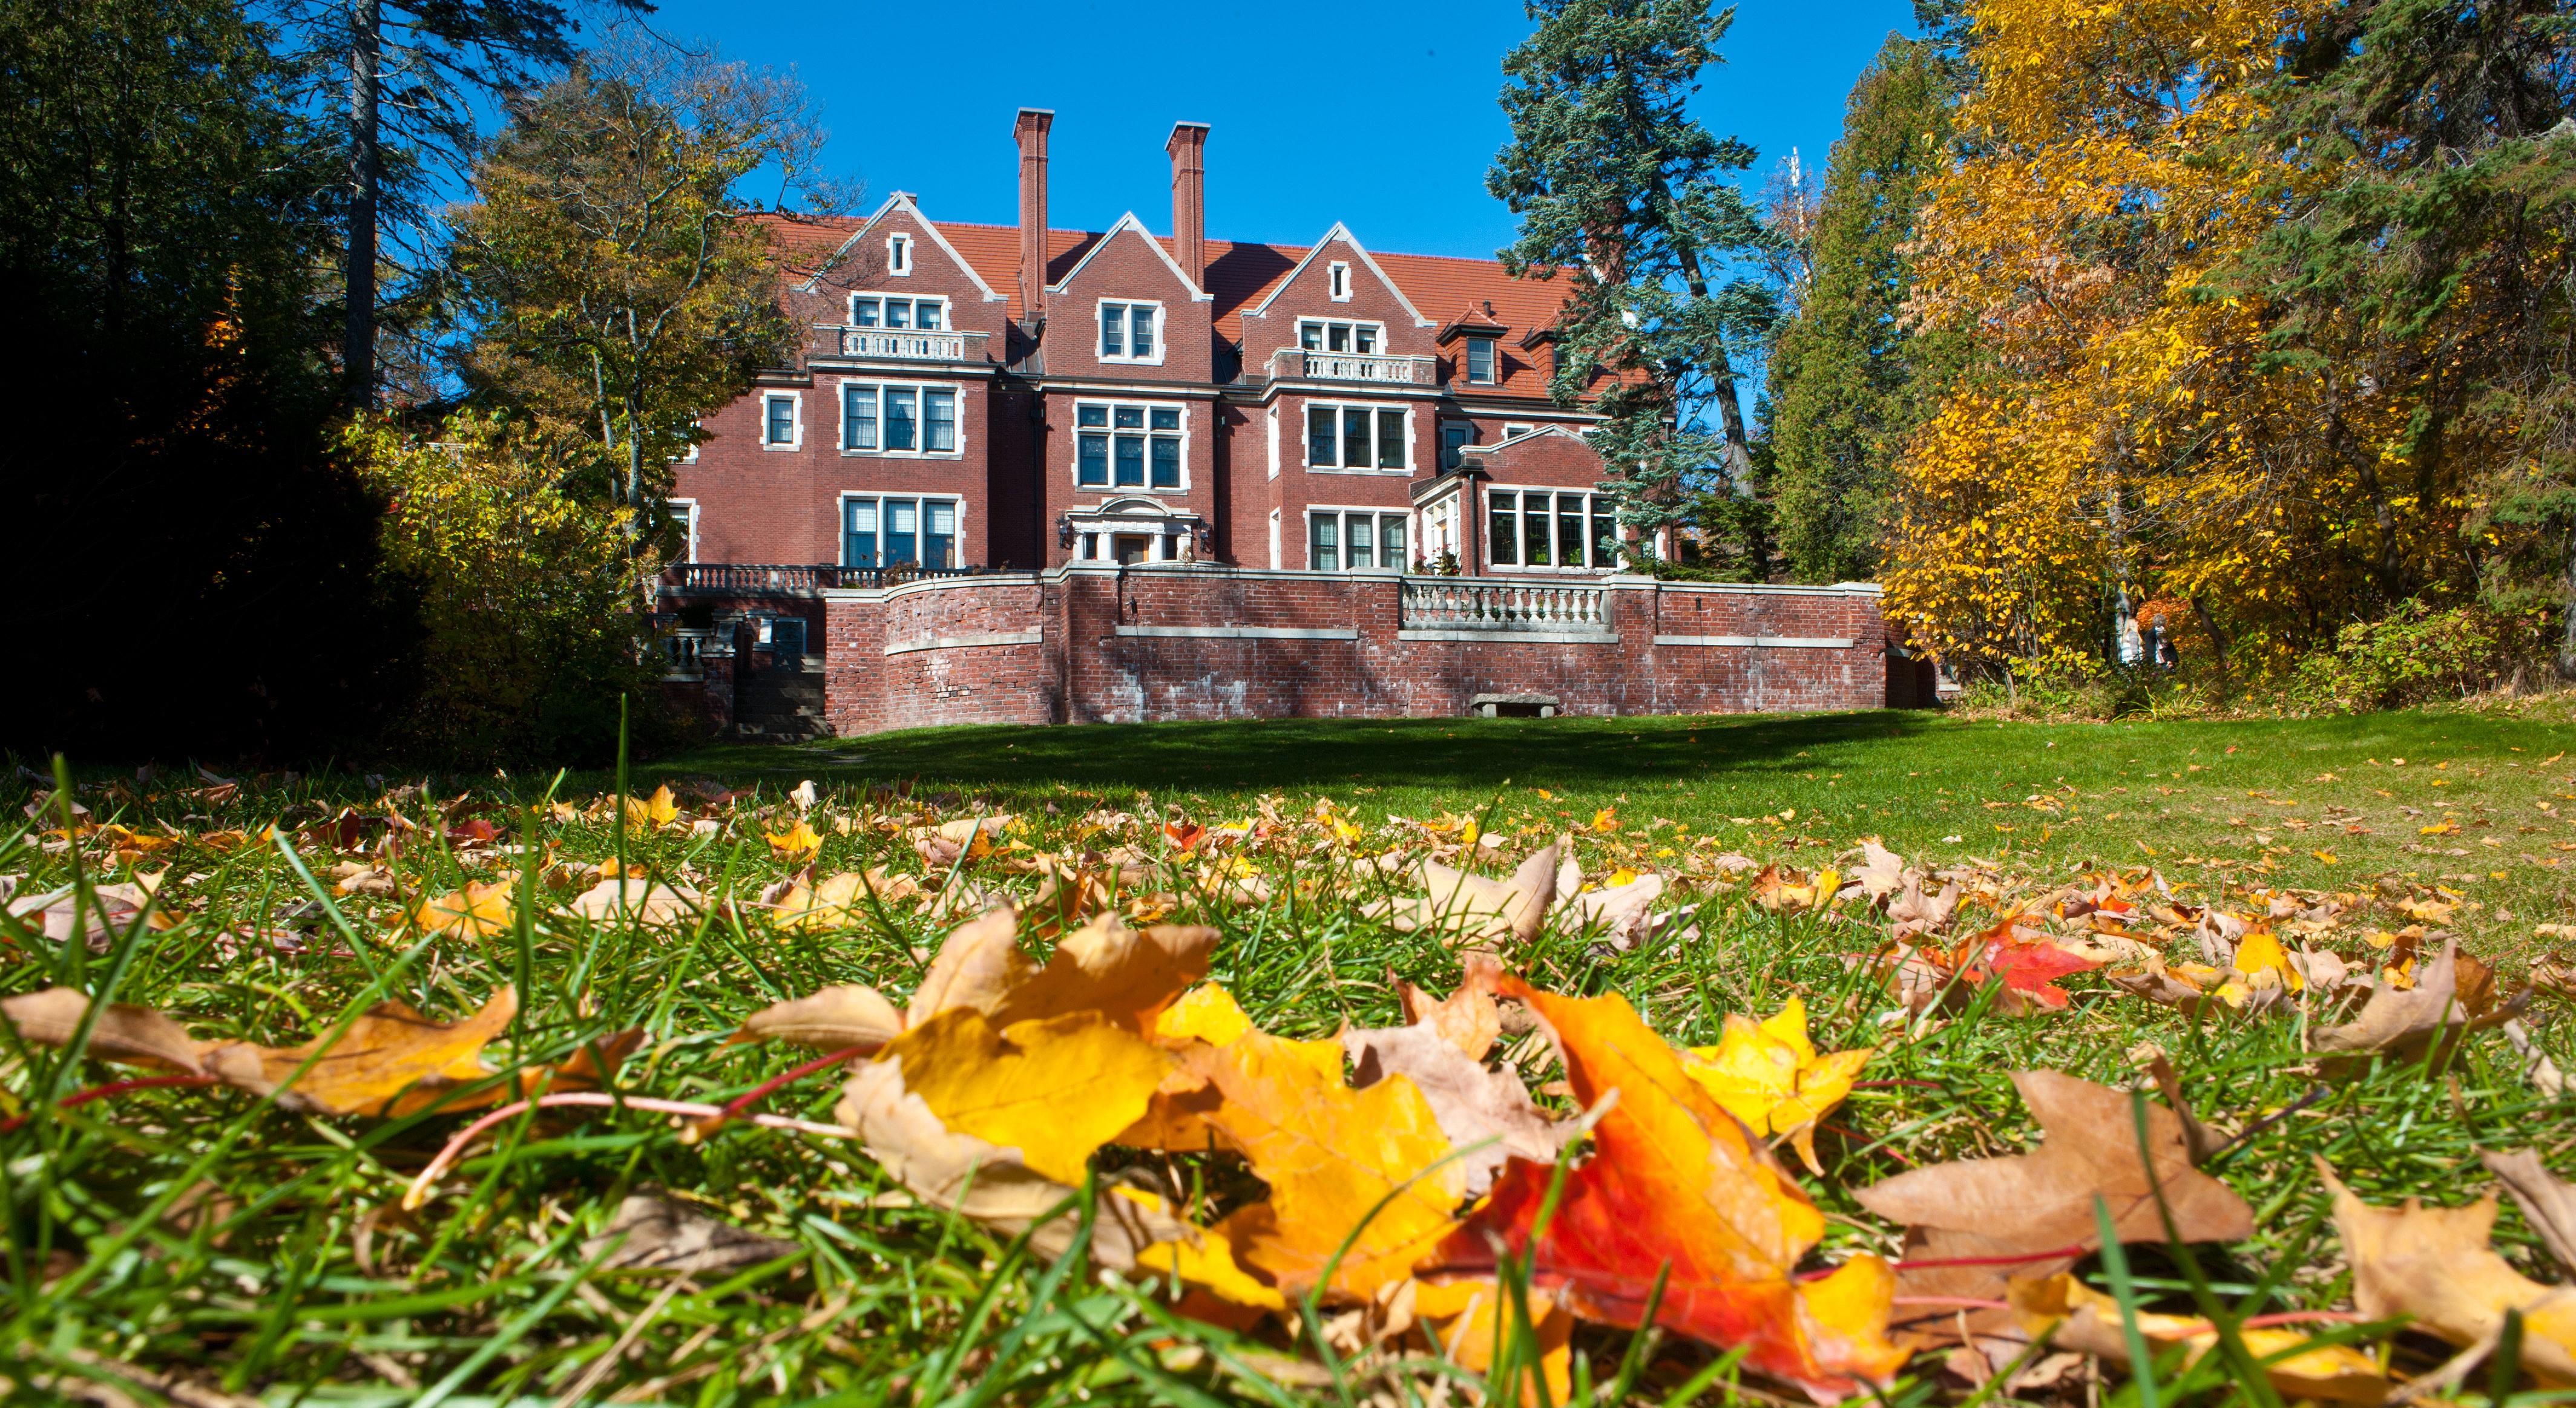 Glensheen Mansion with brightly colored autumn leaves covering the back lawn